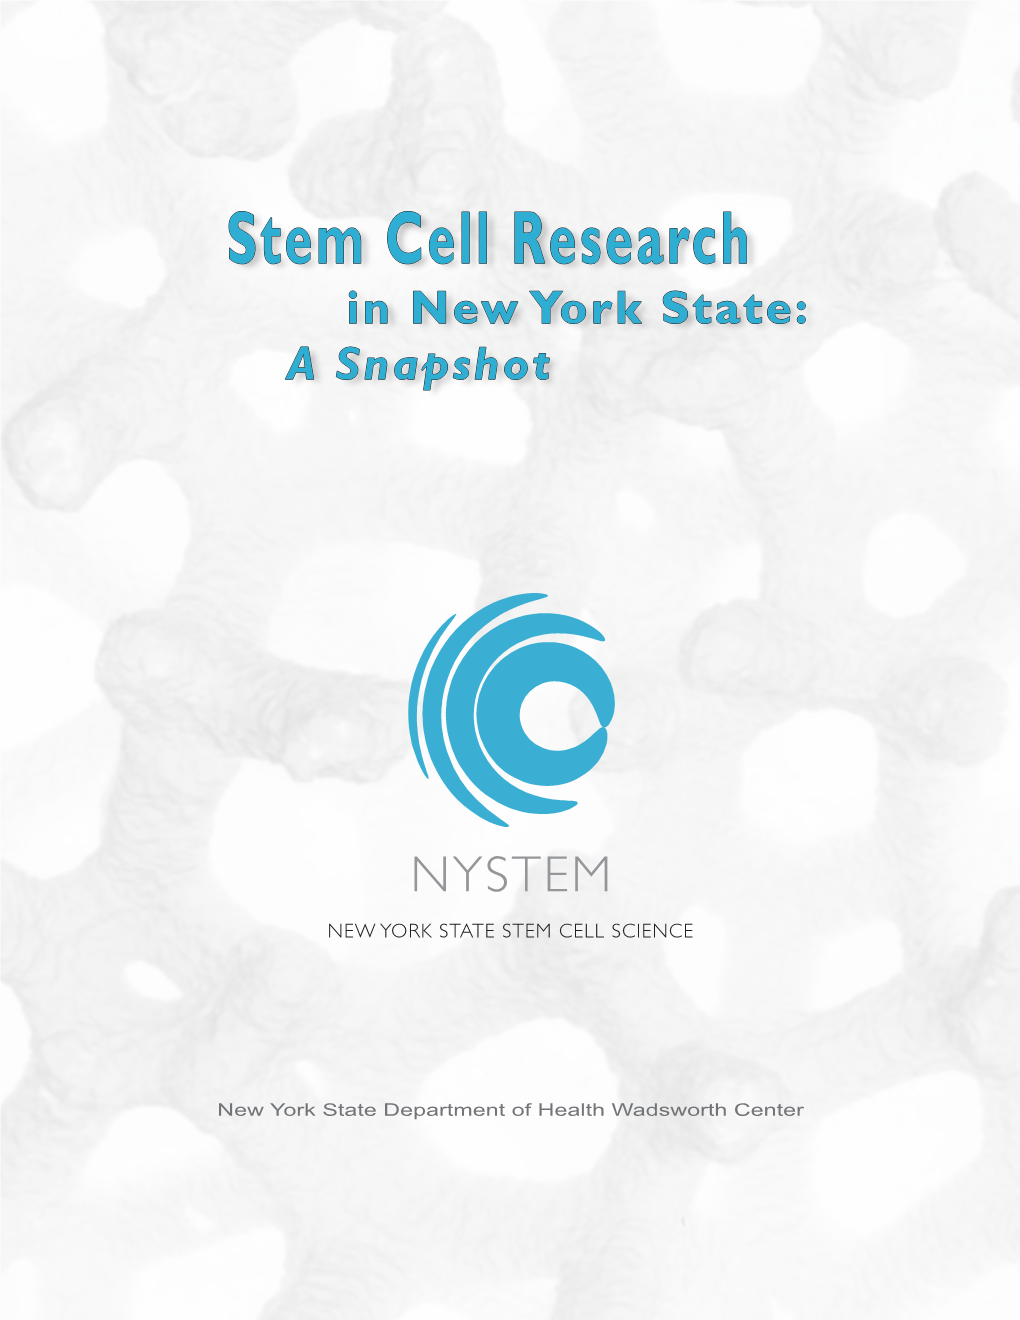 Stem Cell Research in New York State: a Snapshot